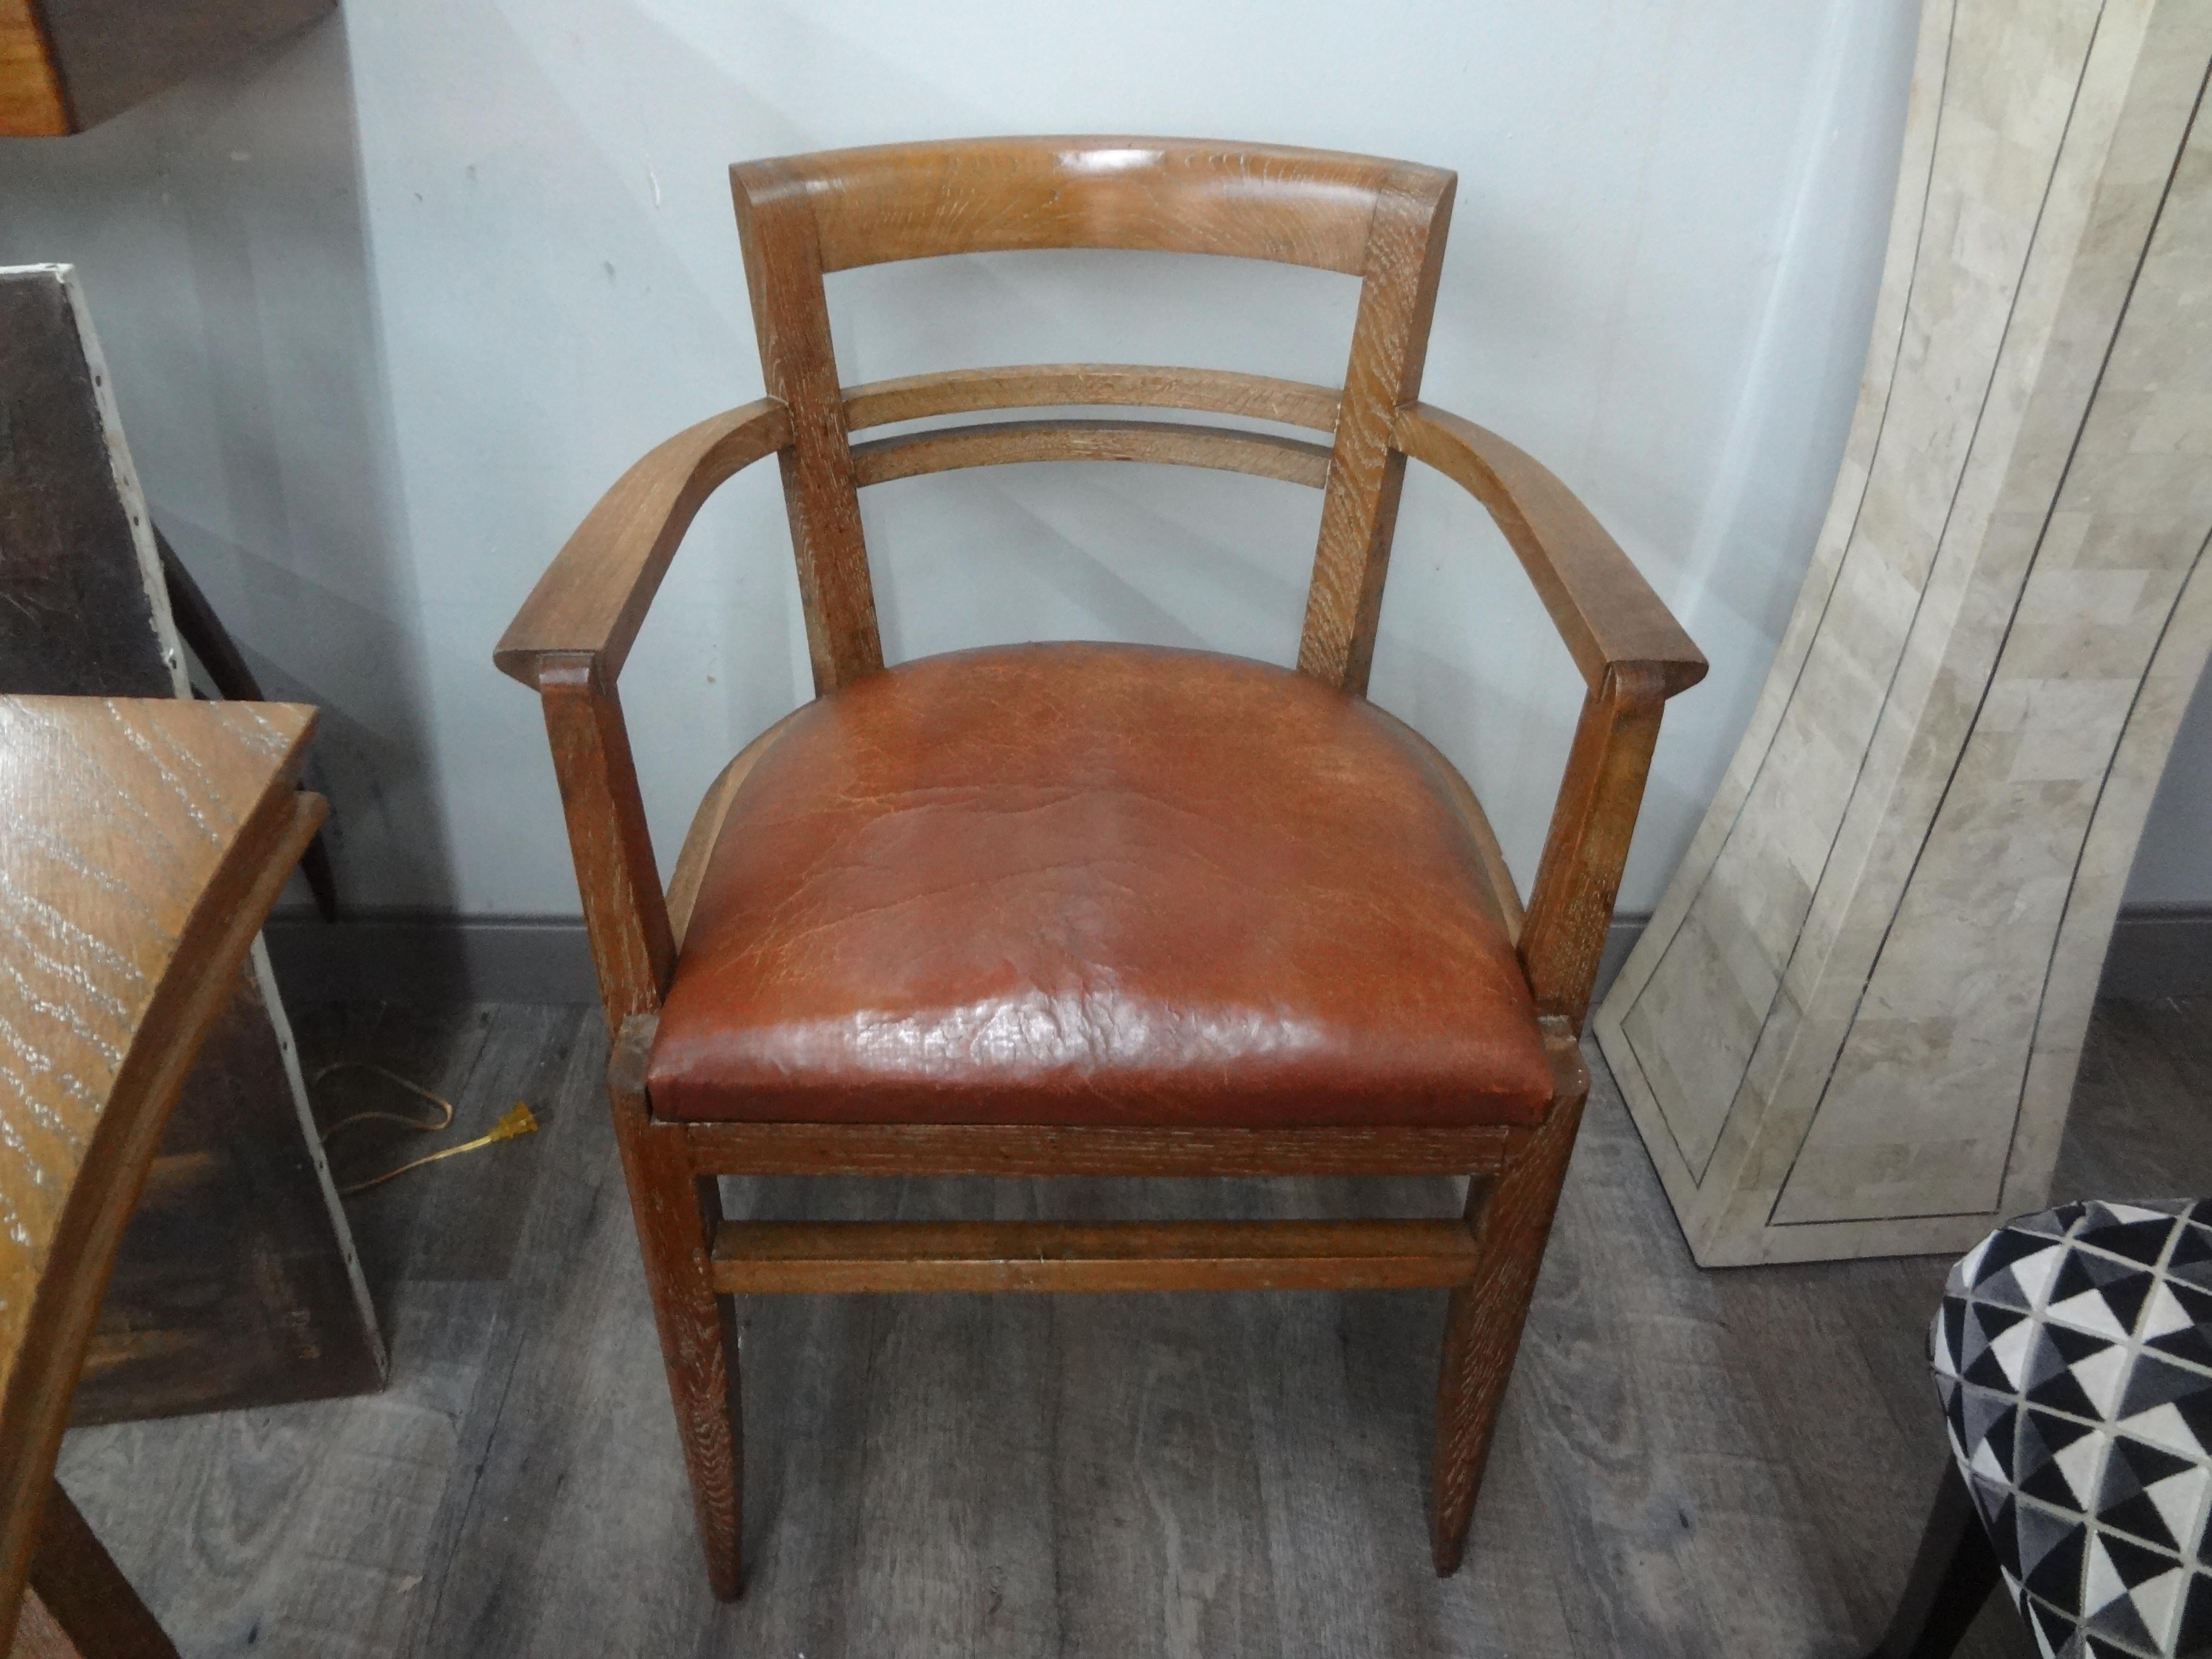 French Art Deco Cerused Oak Desk Chair Attributed To Andre Sornay.
Handsome French Art Deco cerused or limed oak desk chair attributed to Andre Sornay. This stunning desk chair or office chair has a distressed leather seat and would look great with